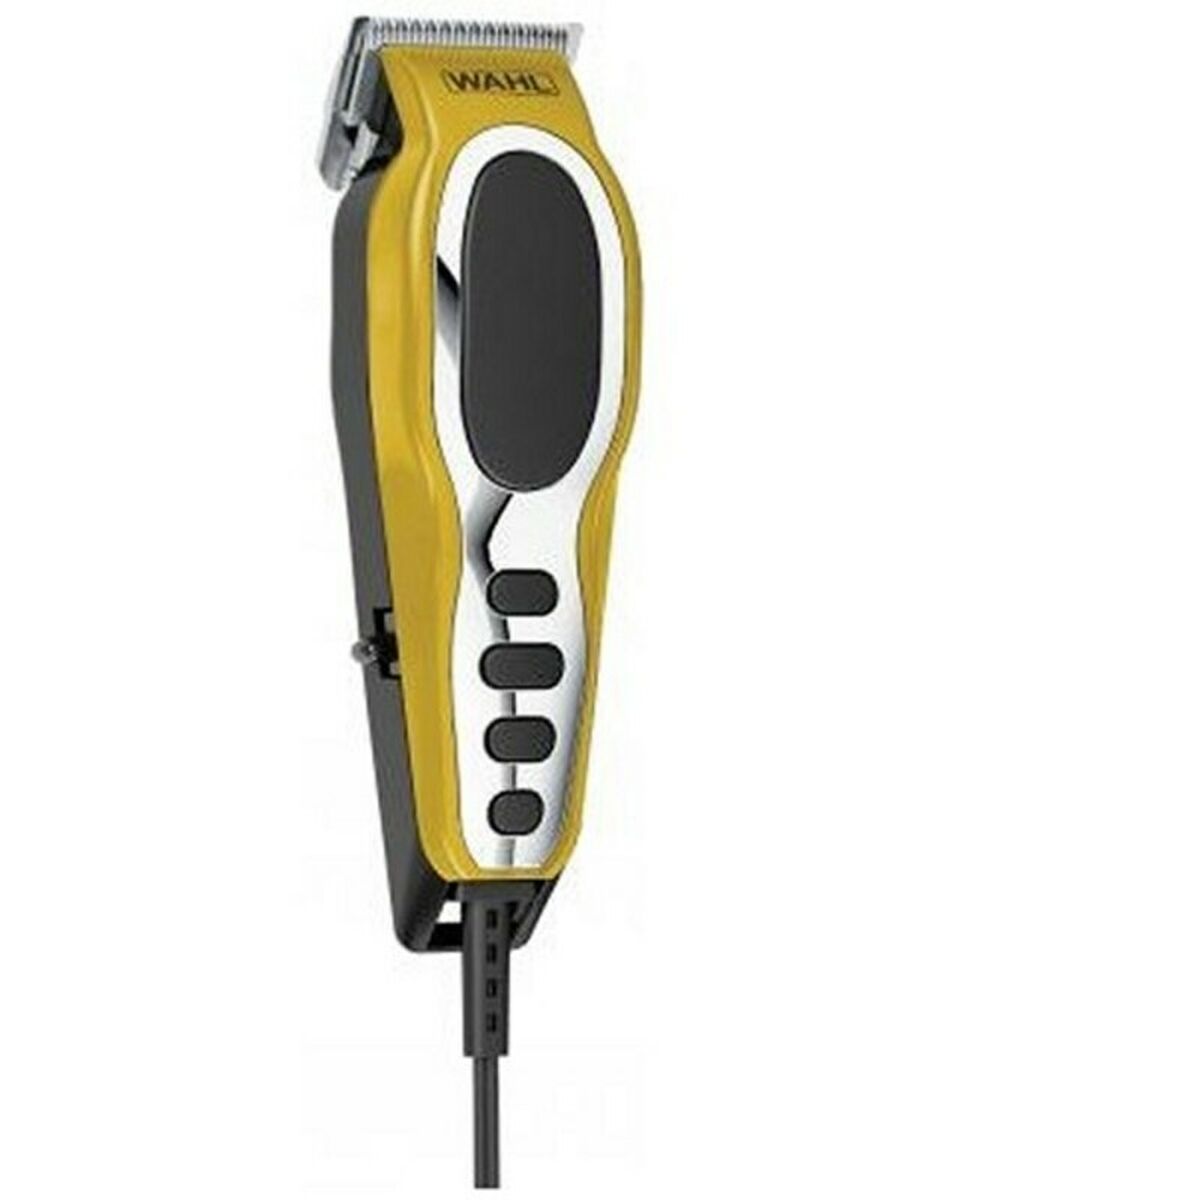 Hair Clippers Wahl 79111-1616 900W